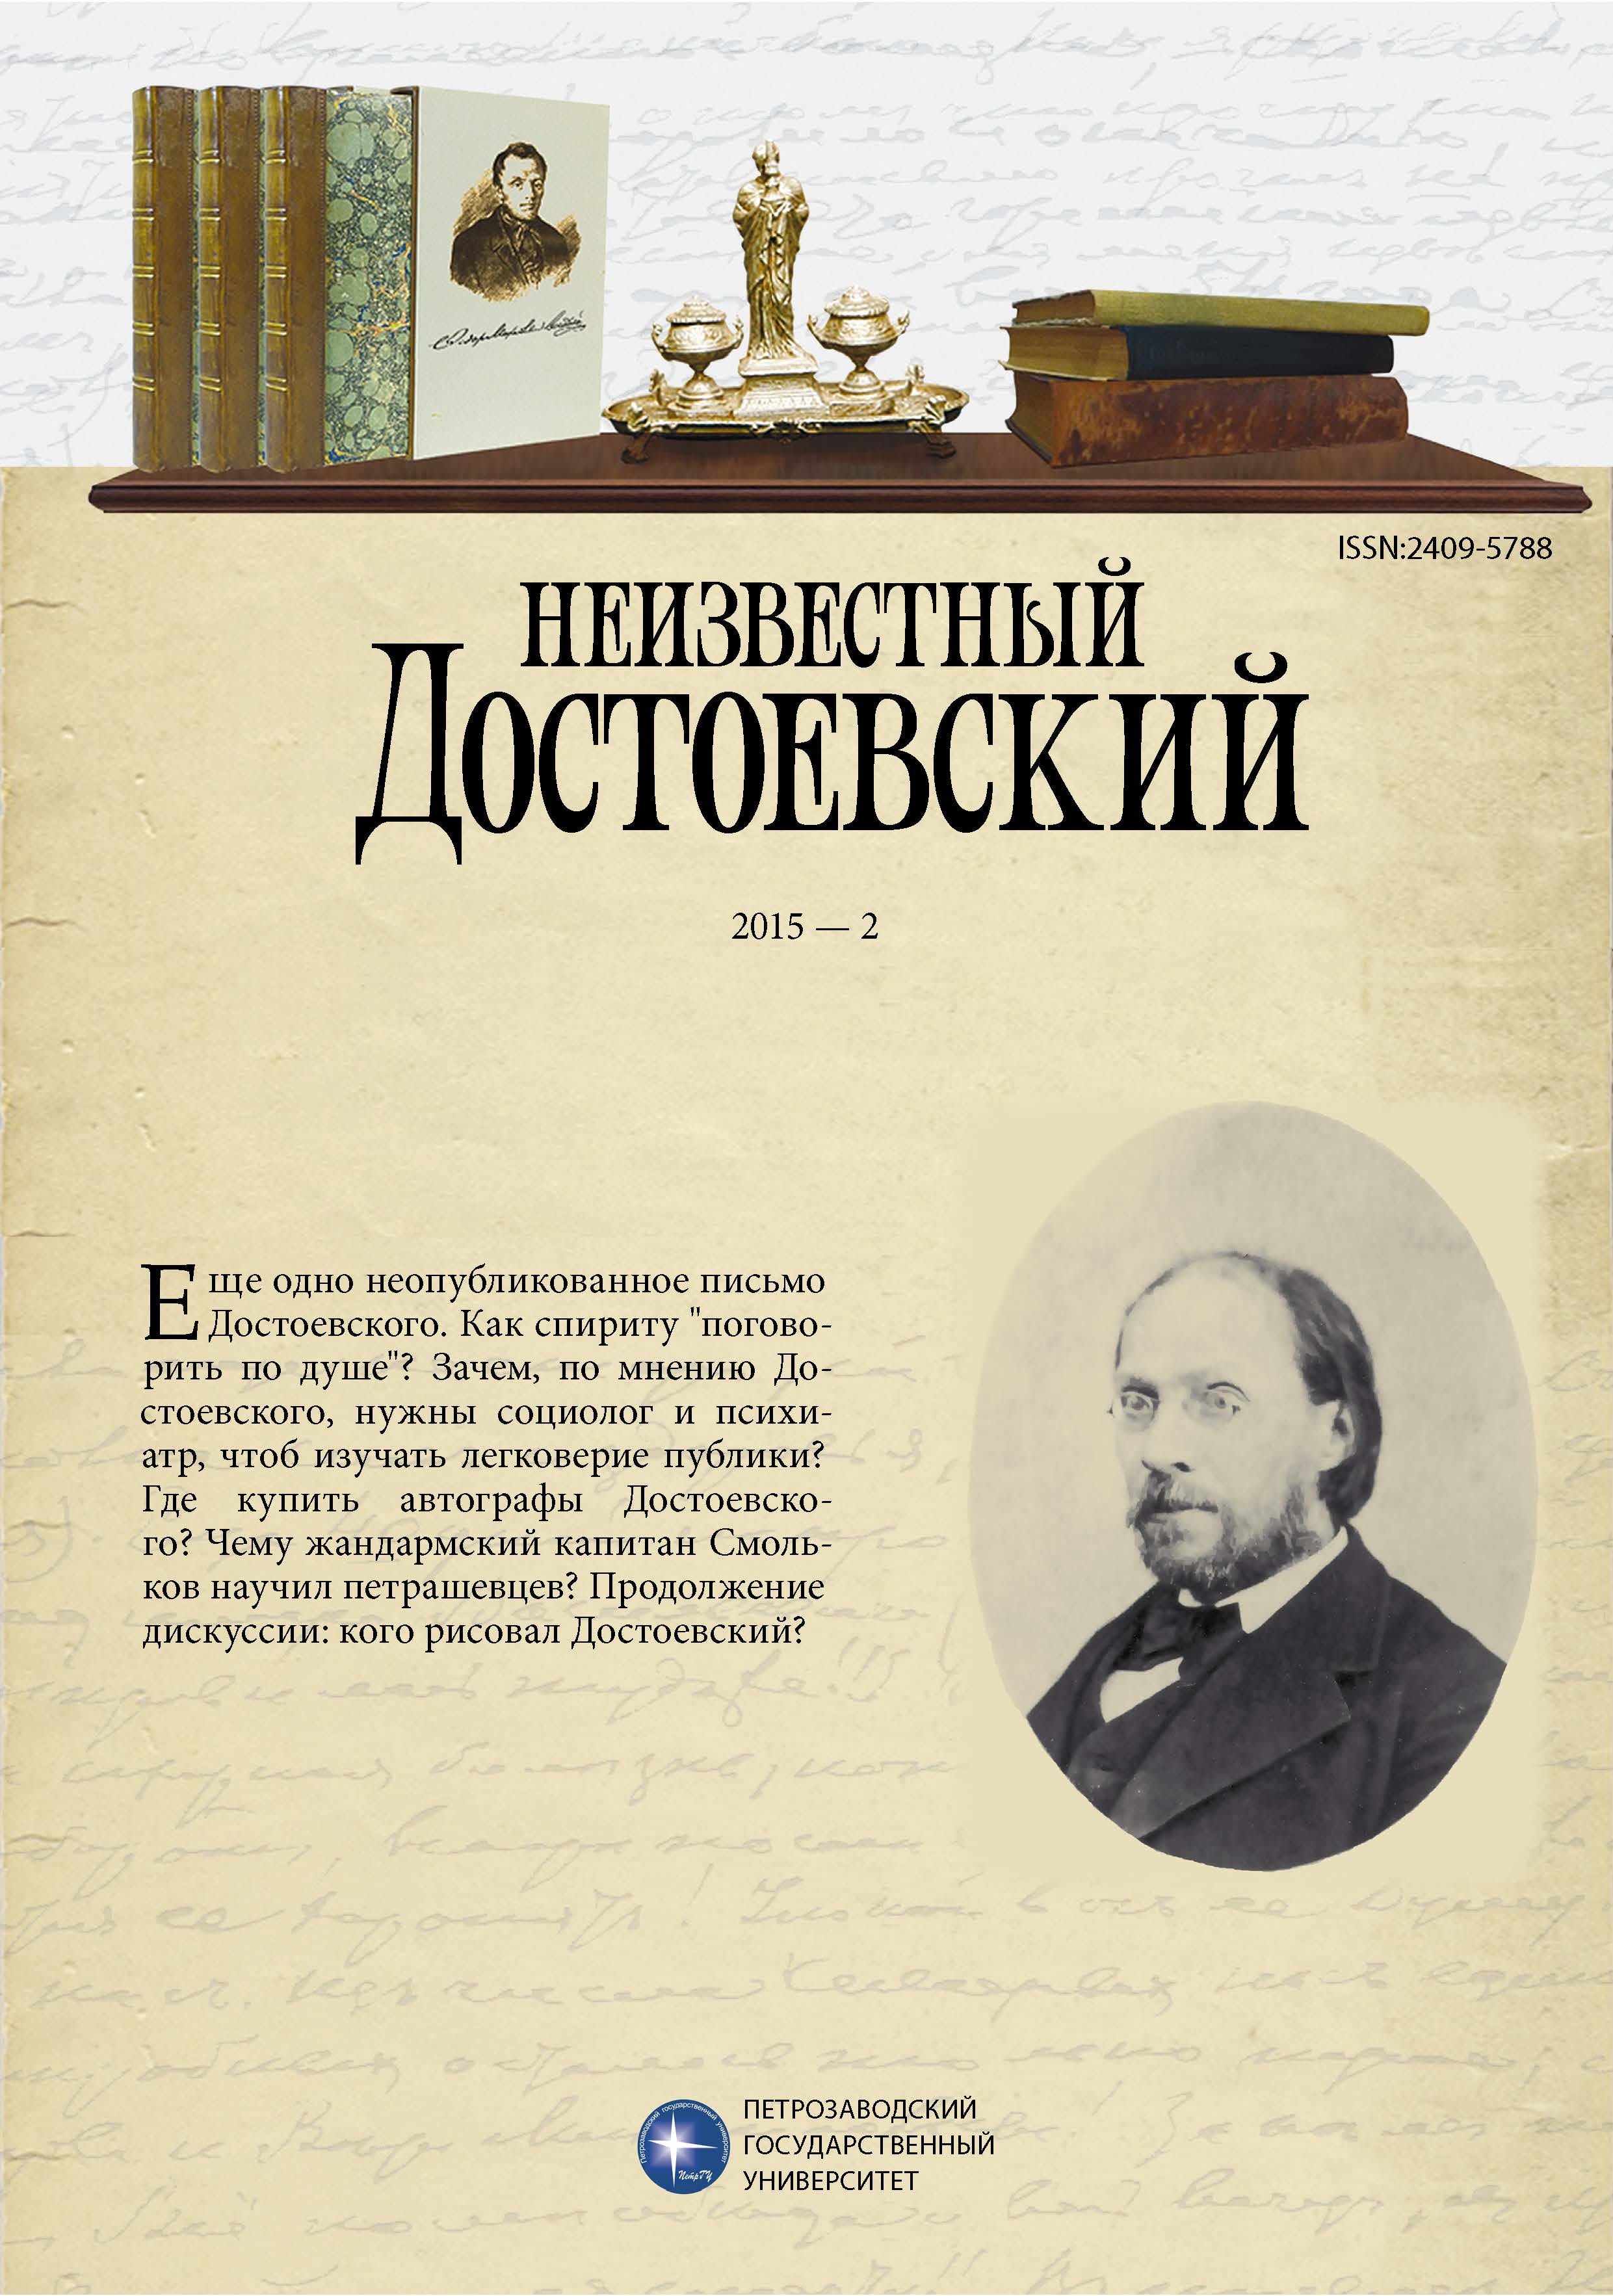 Who Presented the Gospel to Dostoevsky in January 1850? Cover Image